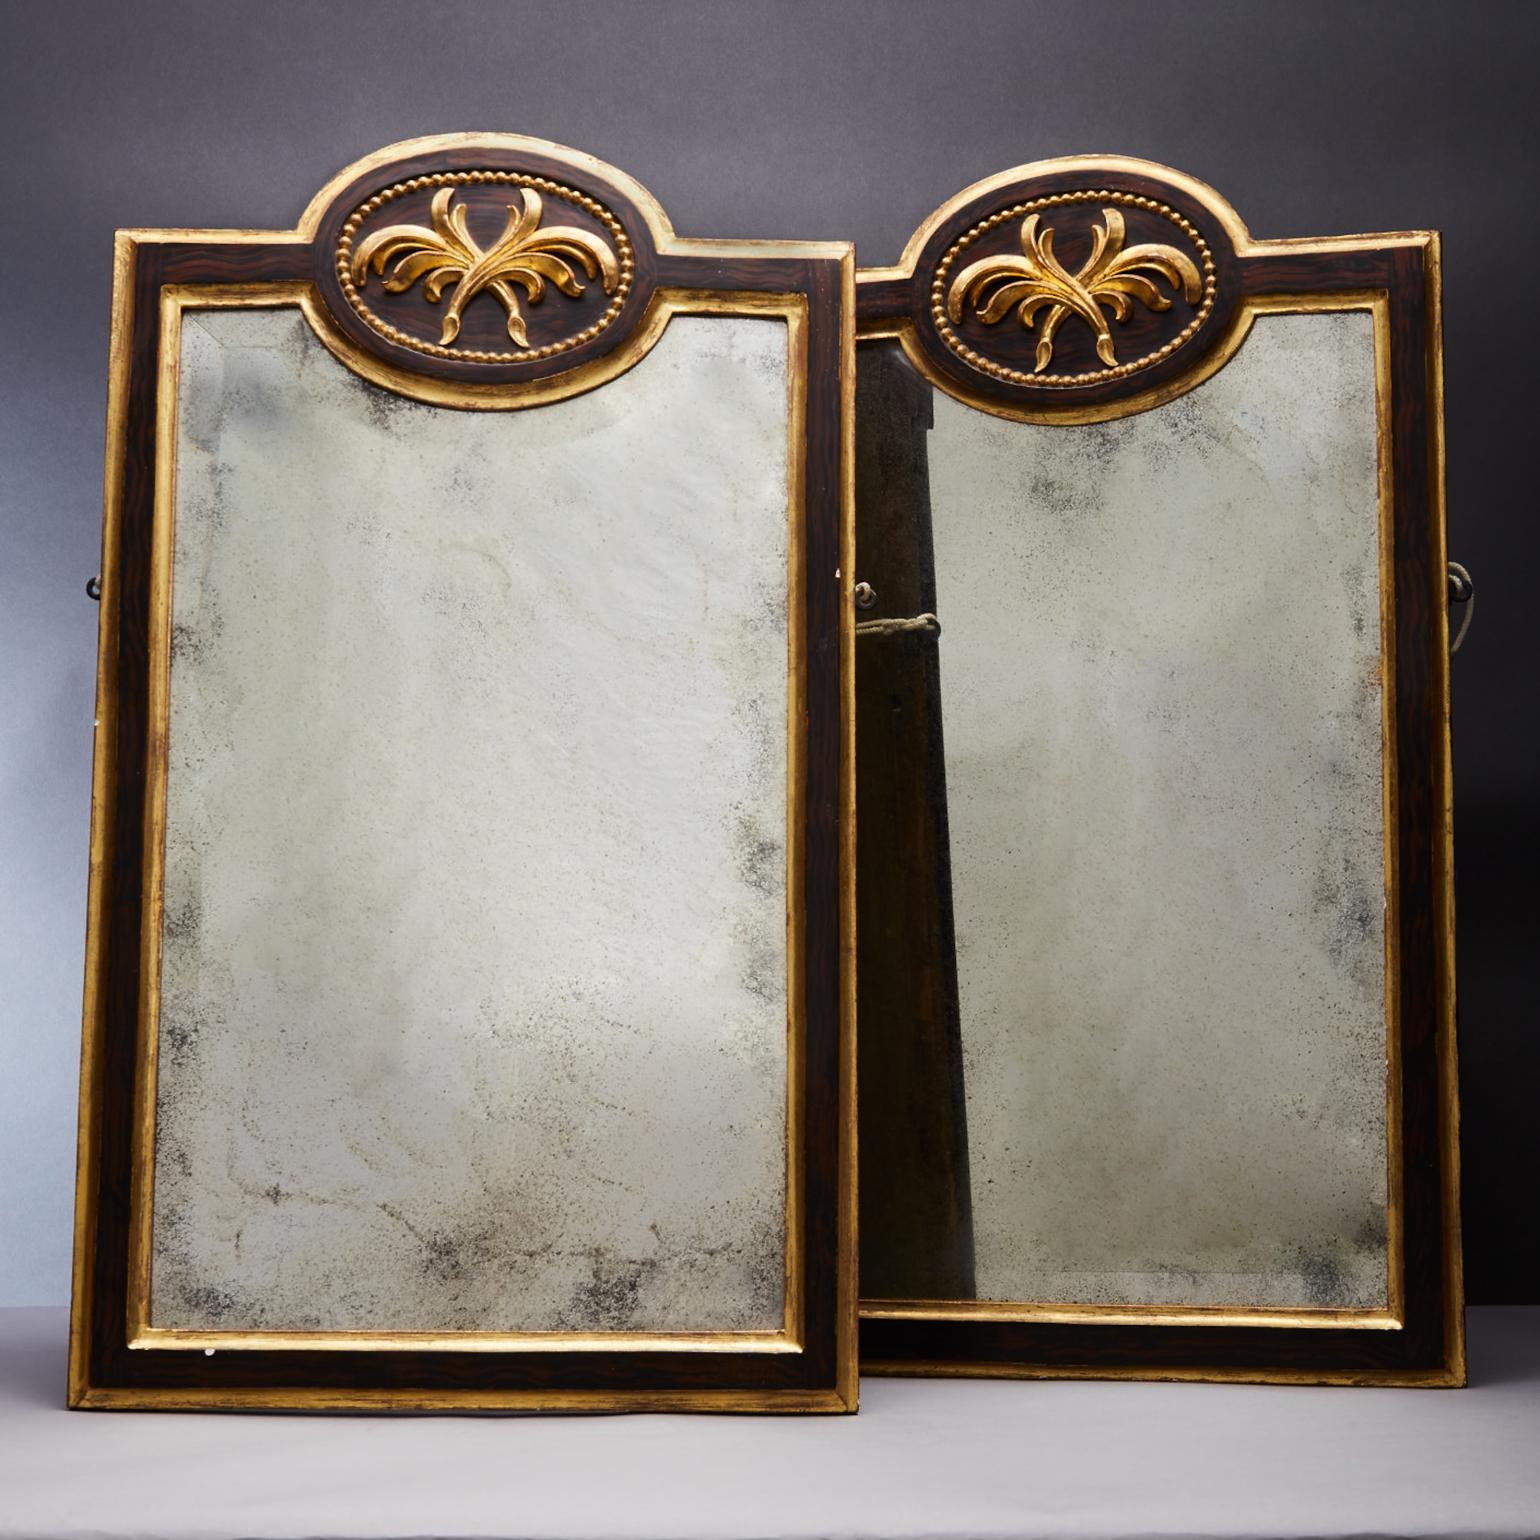 The pair antique gilt and ebonized mirrors with a central cartouche above of a leaf motif. The frames are made of carved wood and gesso a thin layer of gold leaf is then applied over the surface. Set into the frame the aged oxidized mirror gives a